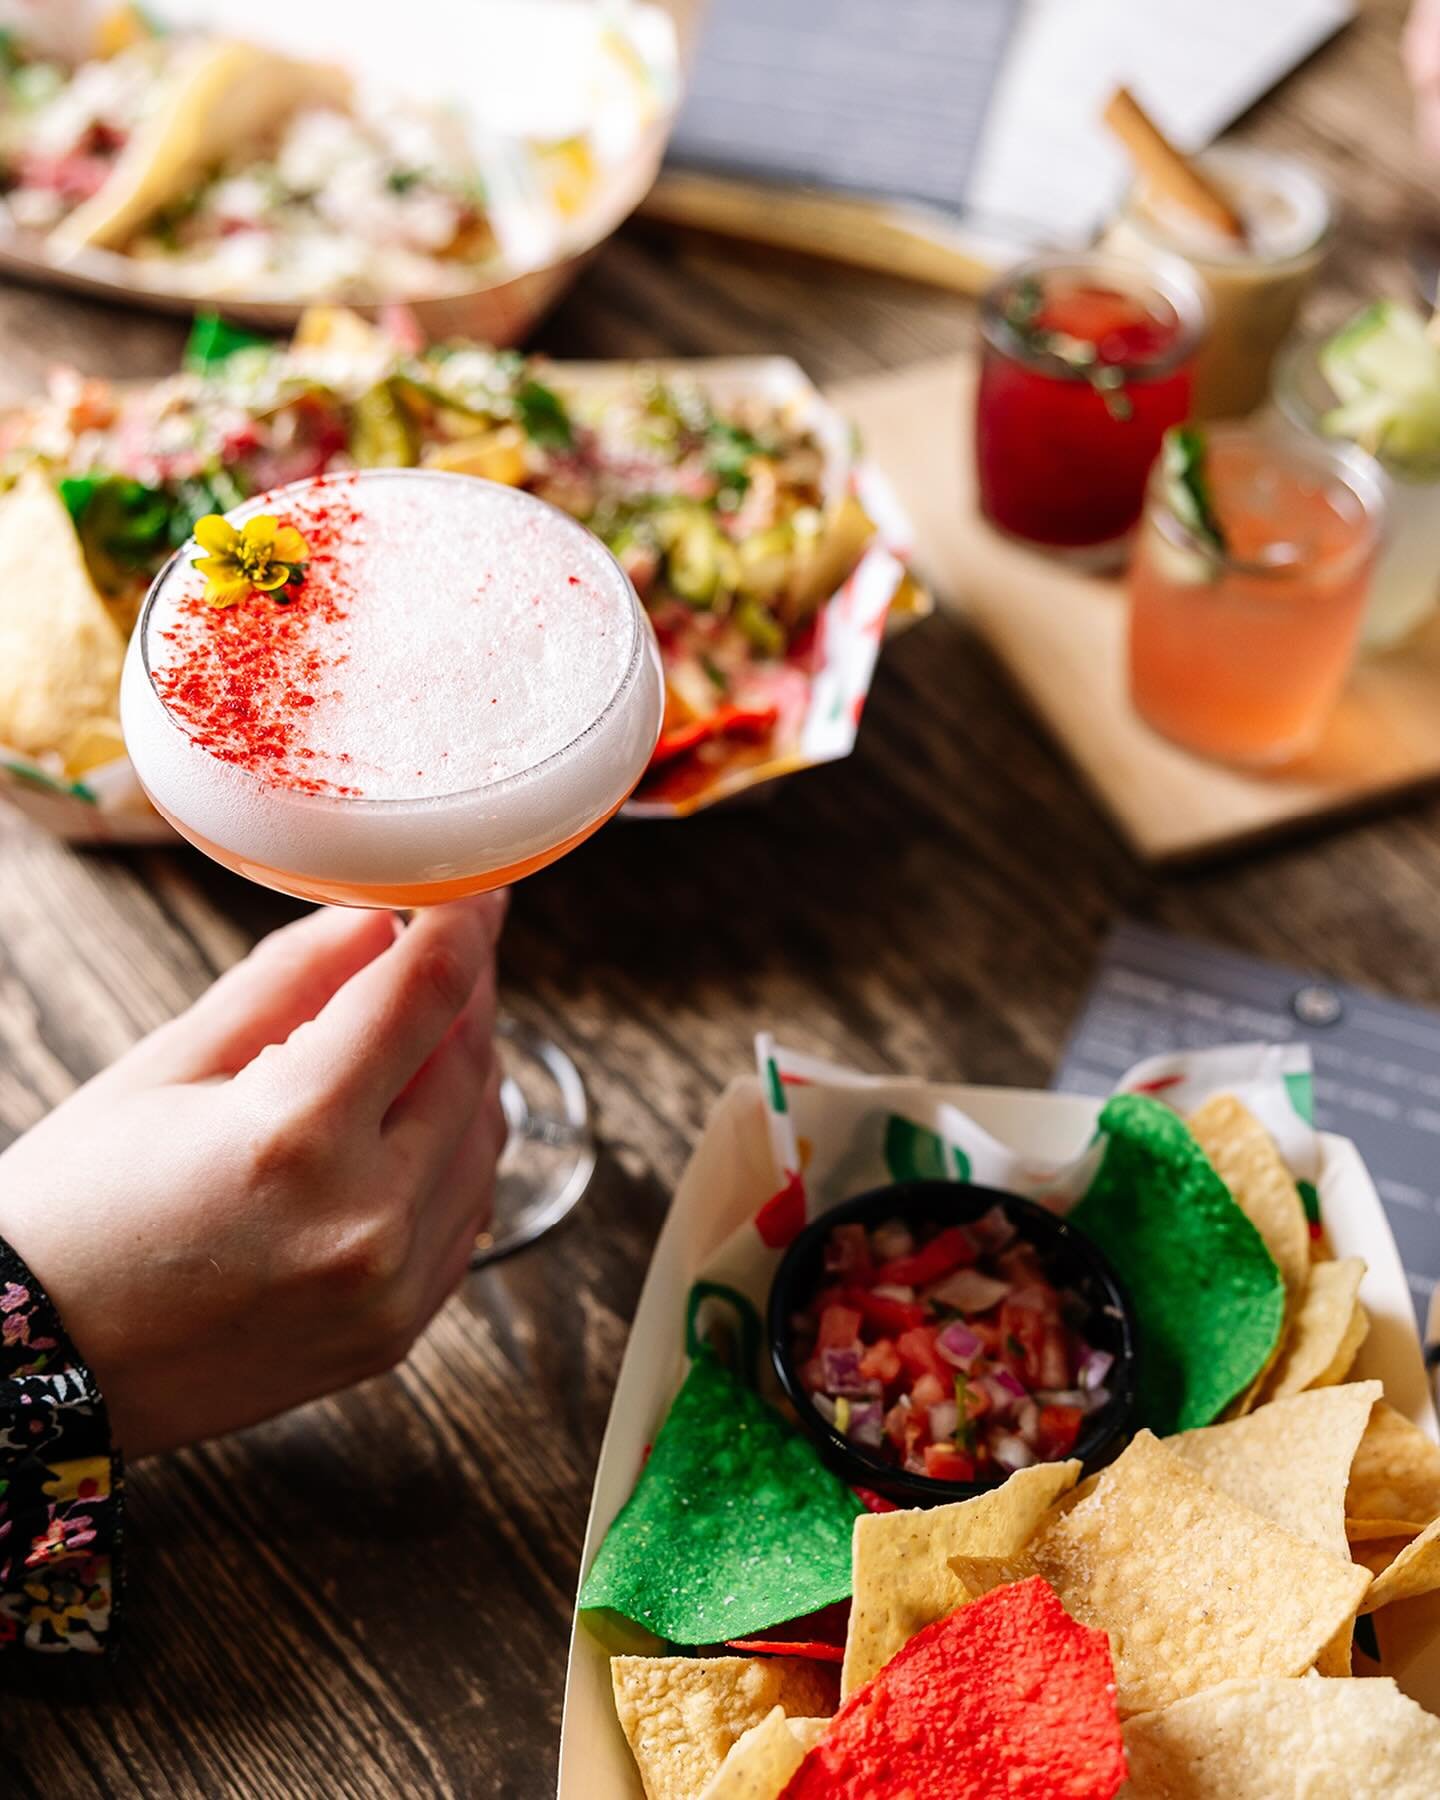 Nothing like some spring menu cocktails from Painted Stave Distilling + tacos from Taco Jardin to make your stomach rumble during this lunch hour. 😋

Clients: @paintedstavedistilling @taco_jardin 
🏷️: Delaware food photographer #delawarephotographe